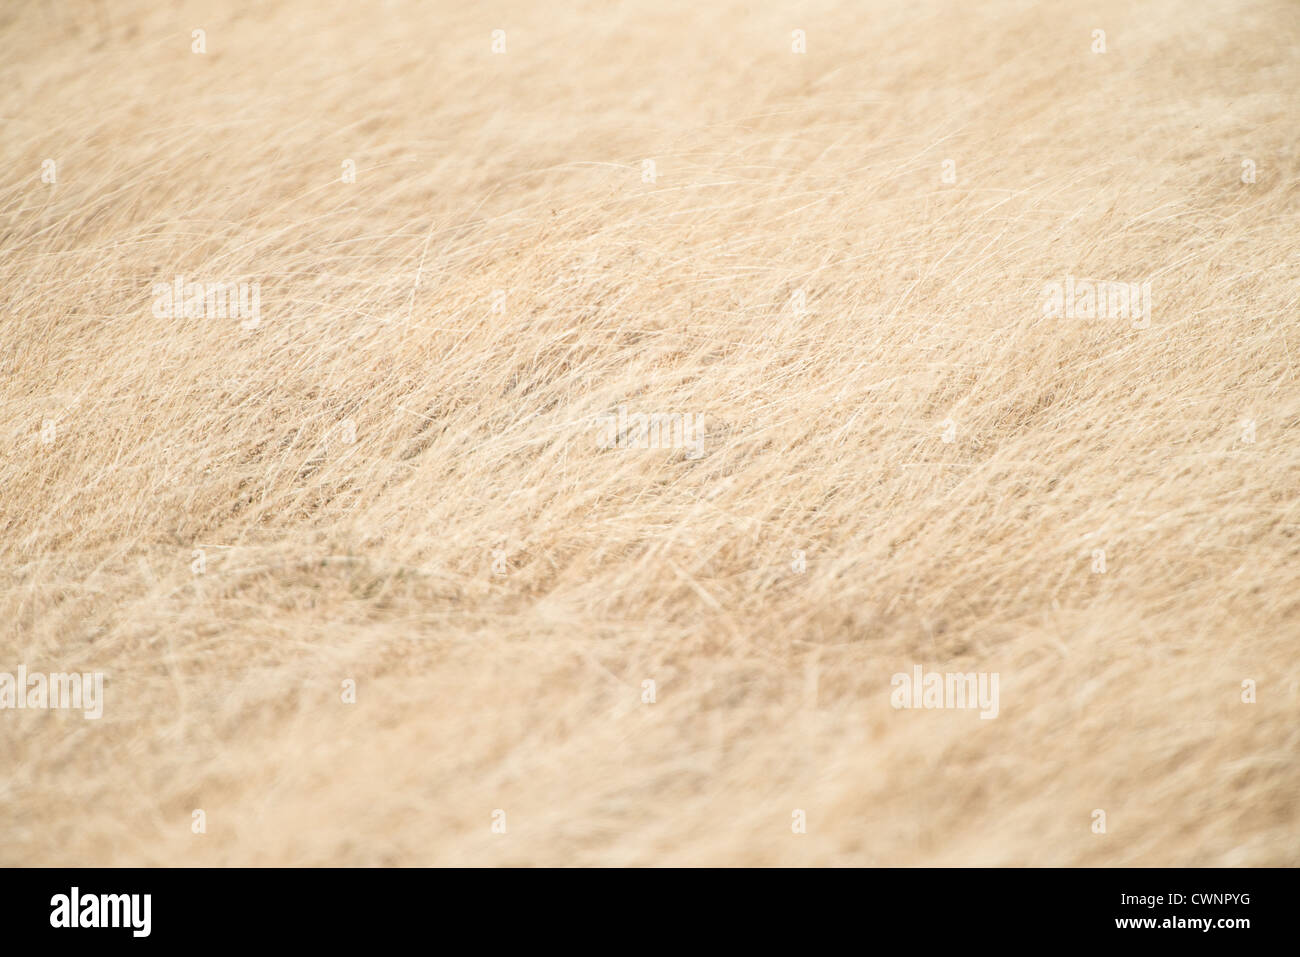 NGORONGORO CONSERVATIONAL AREA, Tanzania - Grass at Ngorongoro Crater in the Ngorongoro Conservation Area, part of Tanzania's northern circuit of national parks and nature preserves. Stock Photo